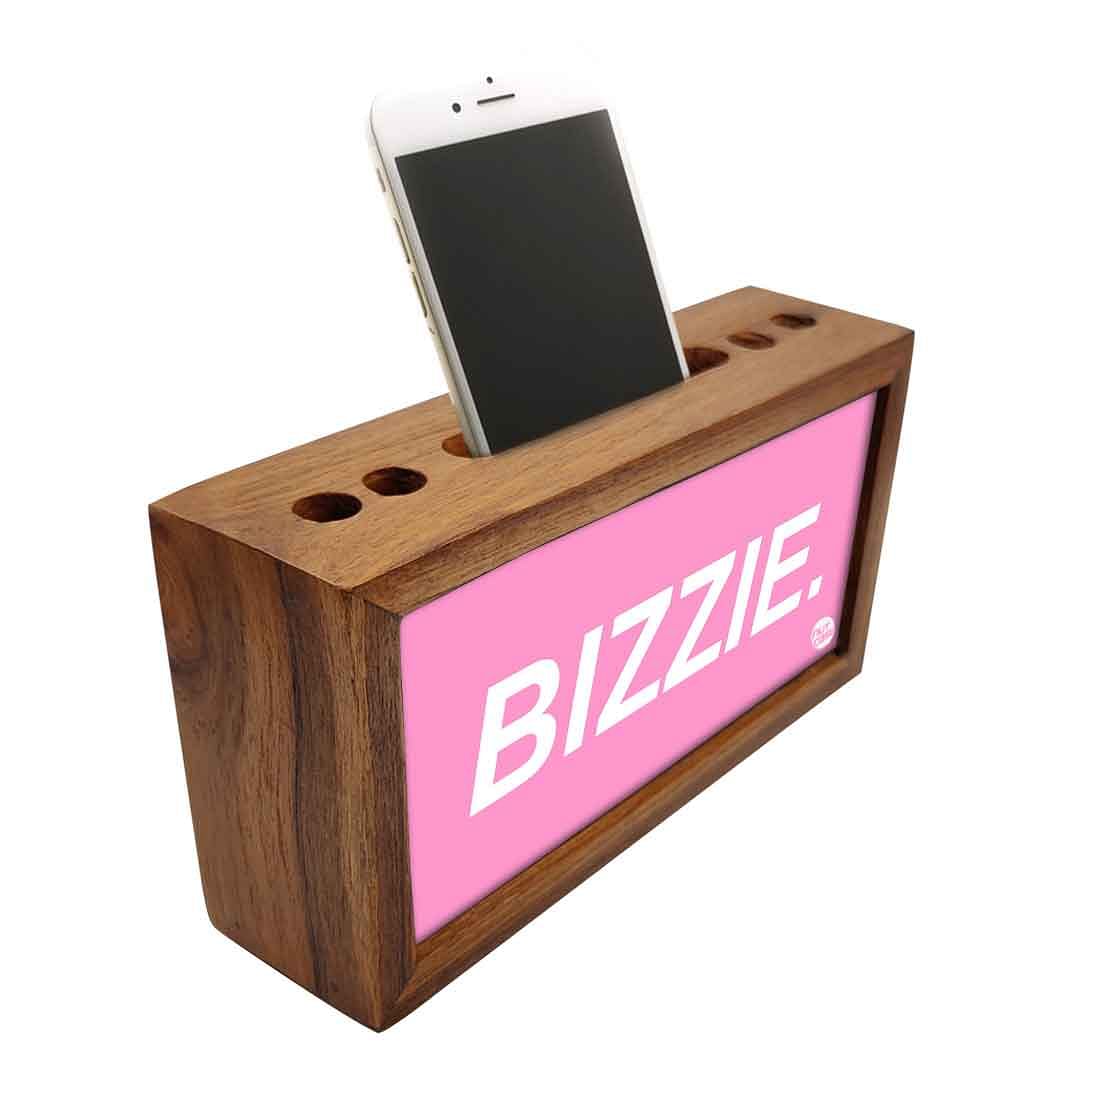 Wooden Table Organizer Pen Mobile Stand - Bizzie Nutcase